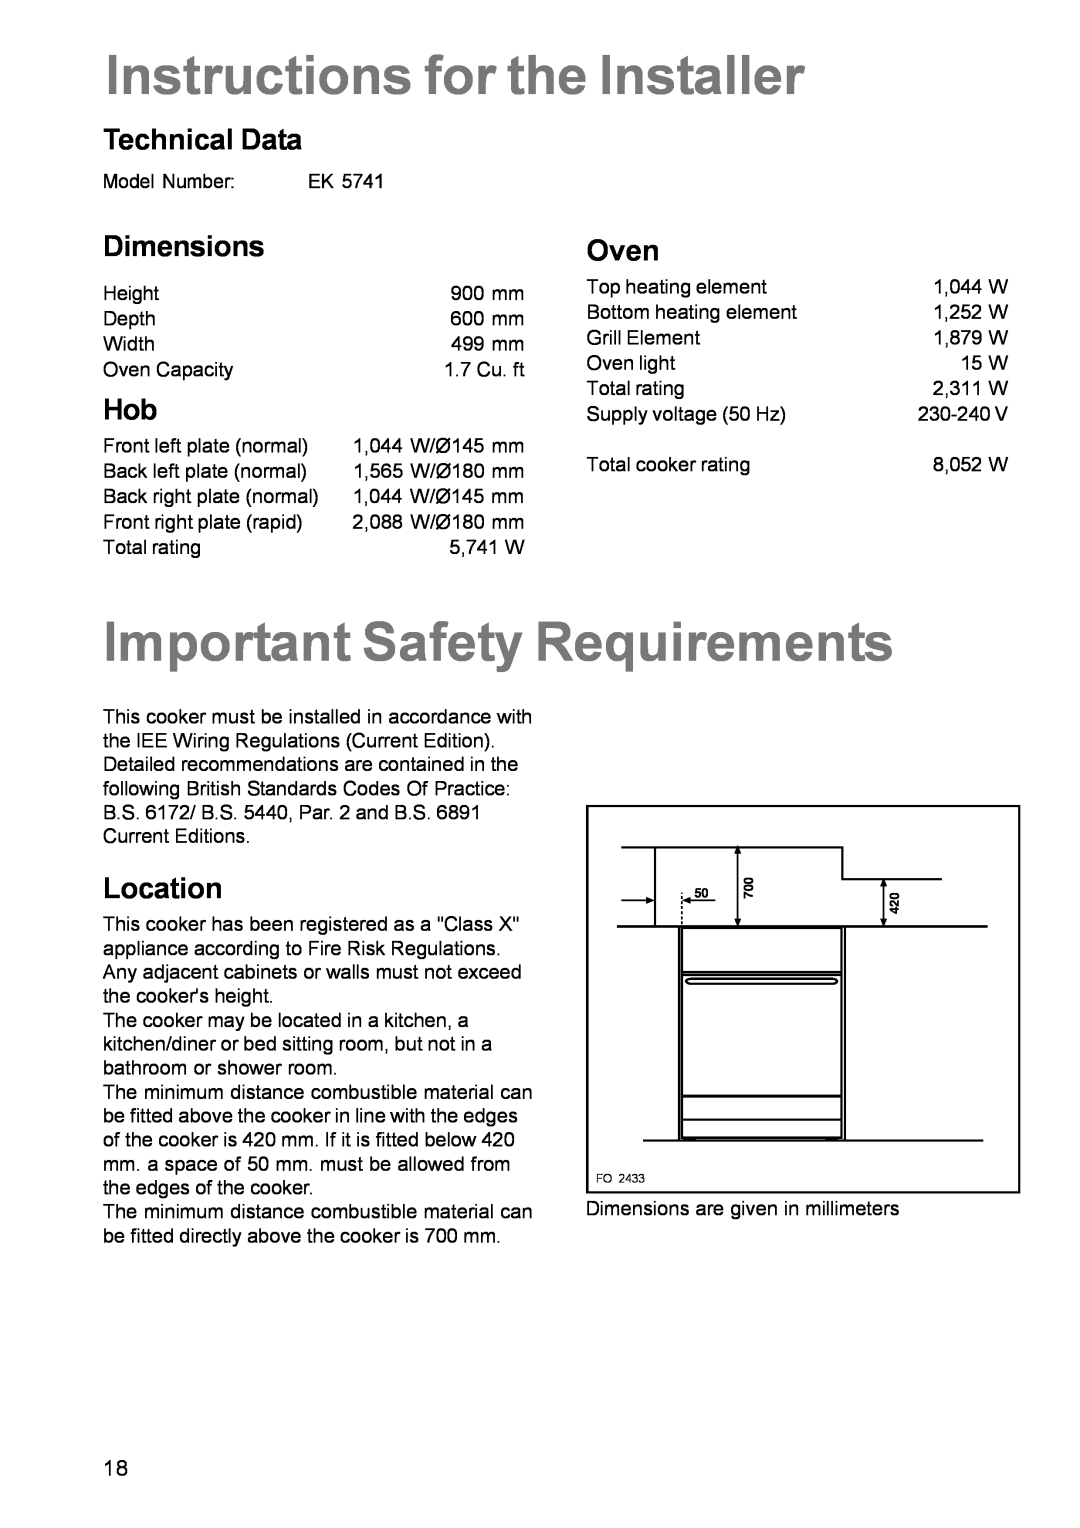 Electrolux EK 5741 manual Instructions for the Installer, Important Safety Requirements, Technical Data, Dimensions, Oven 